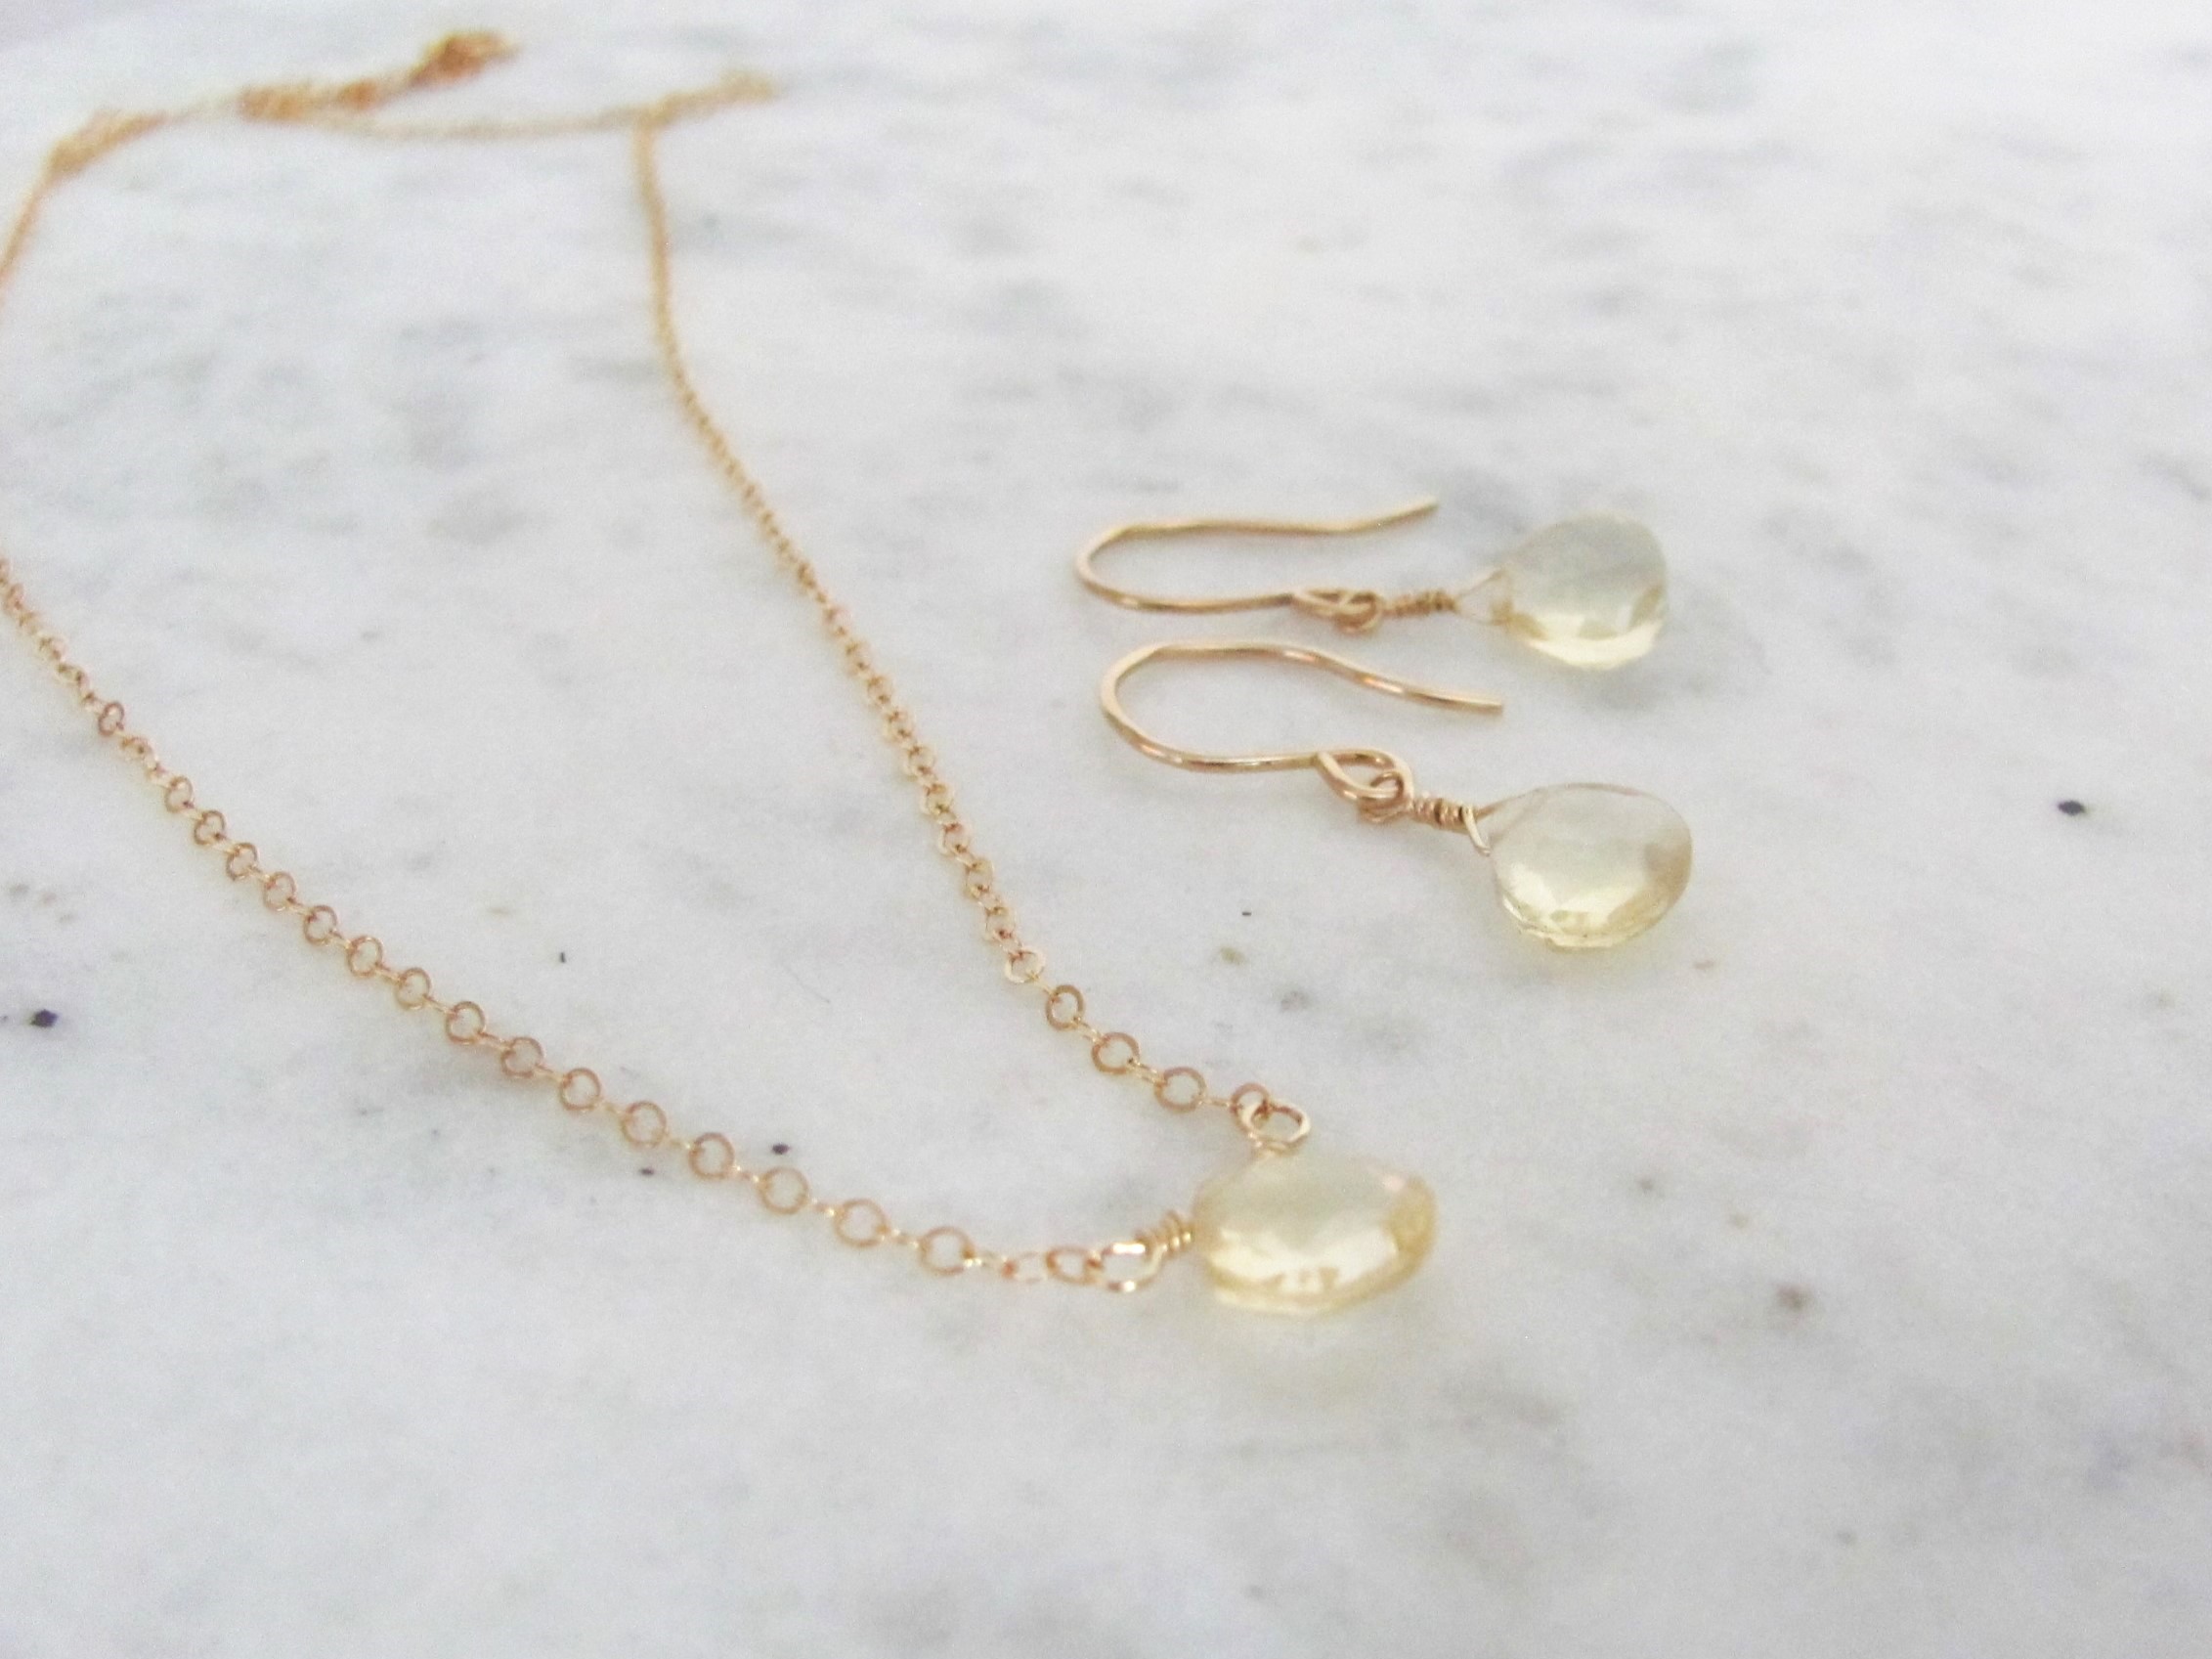 Natural Citrine Necklace and Earring Set